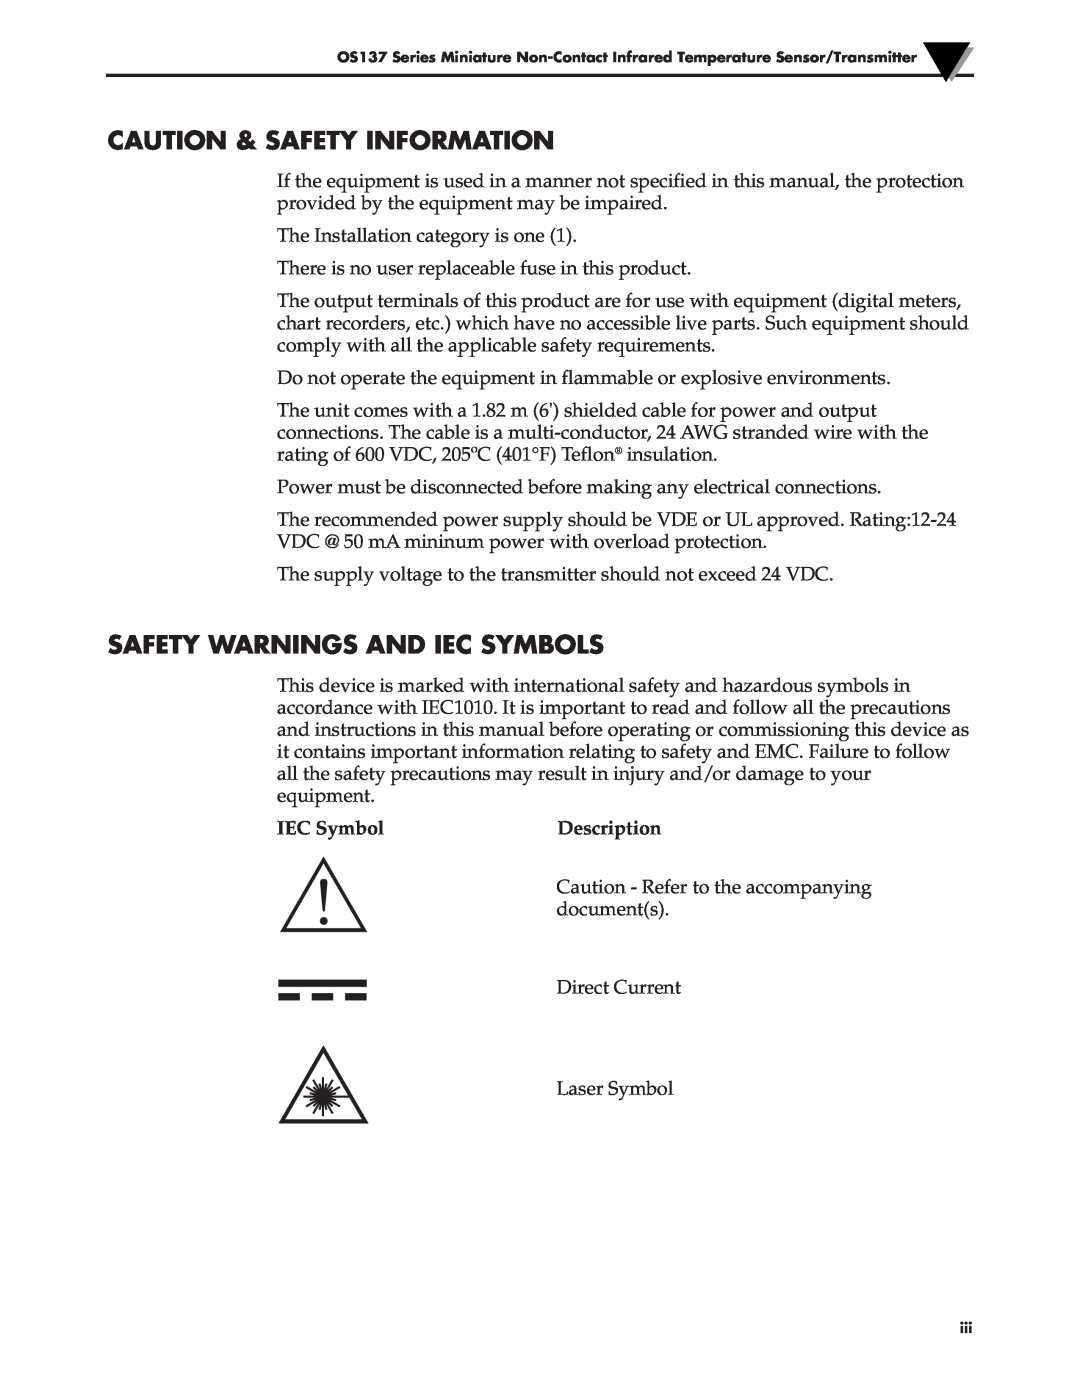 Omega OS137 manual Caution & Safety Information, Safety Warnings And Iec Symbols, IEC Symbol, Description 